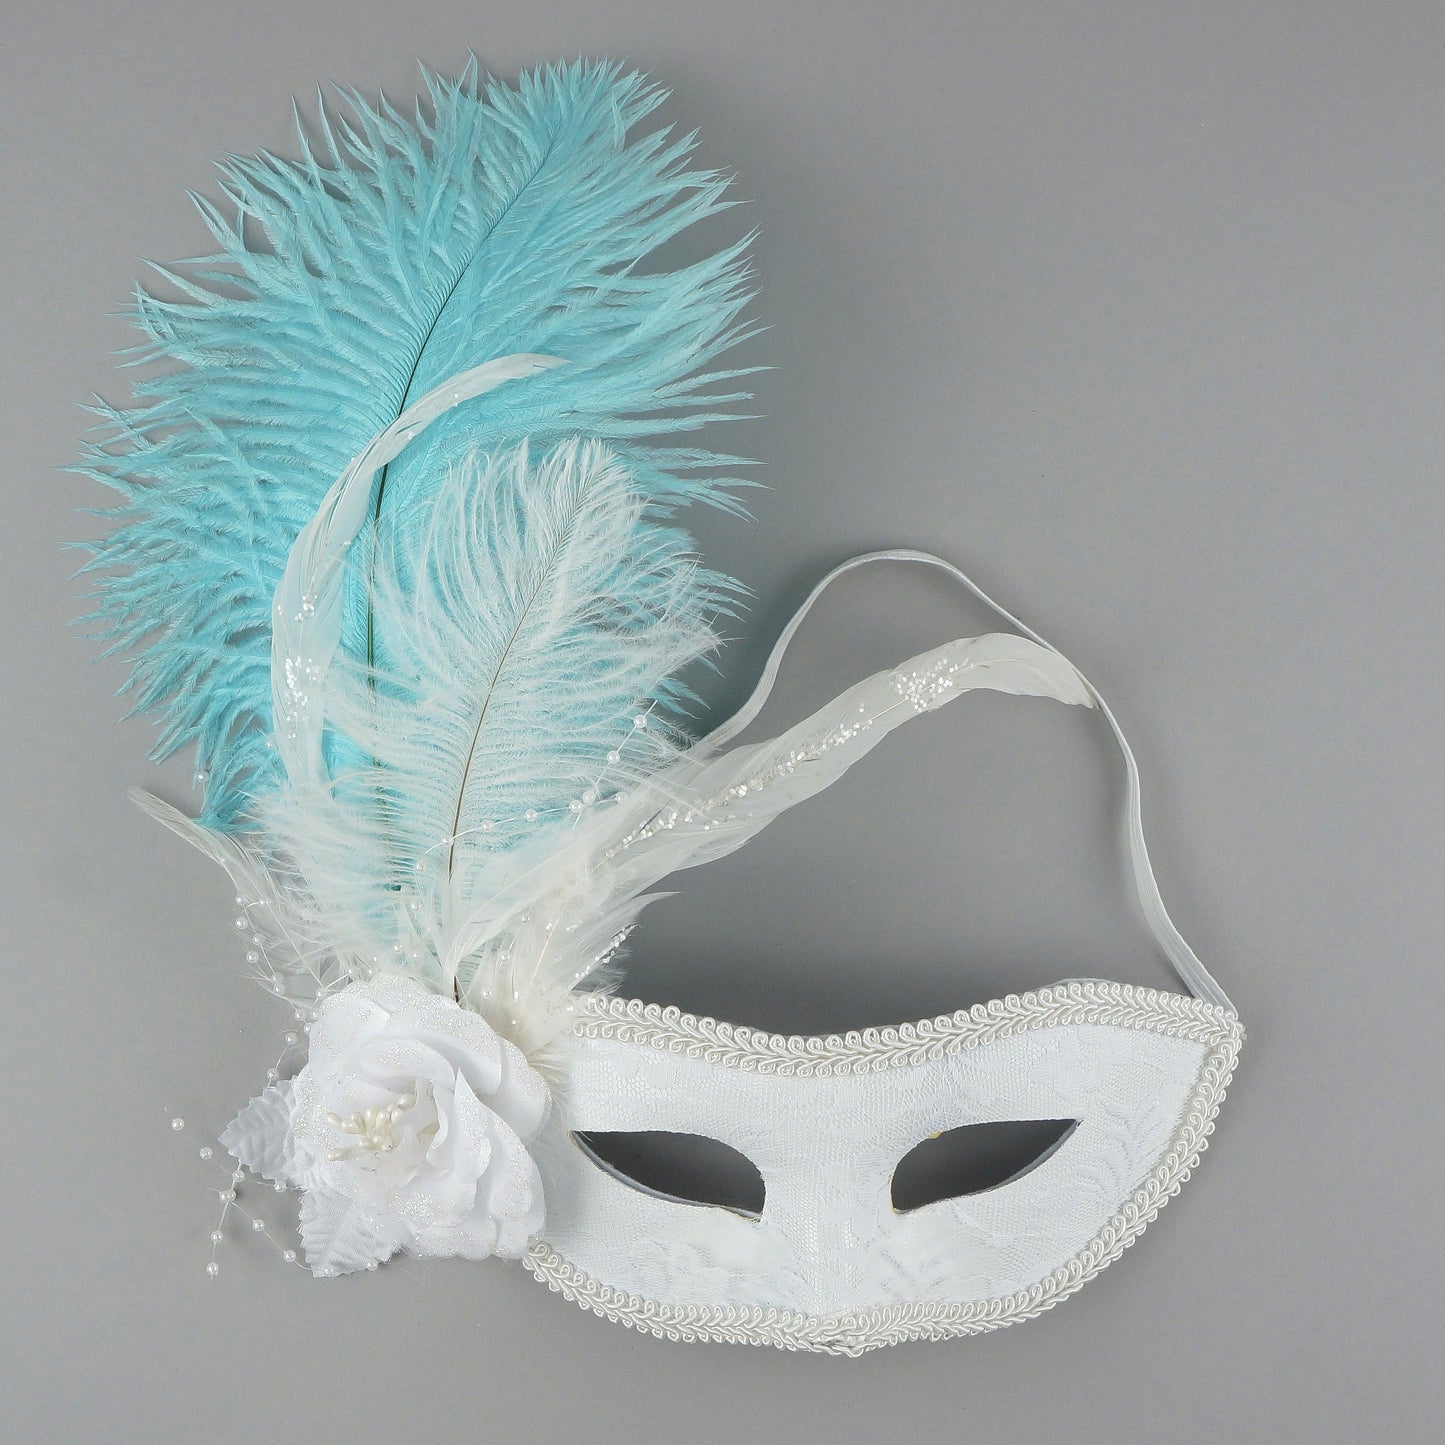 Ostrich Feathers 9-12" Drabs - Light Turquoise